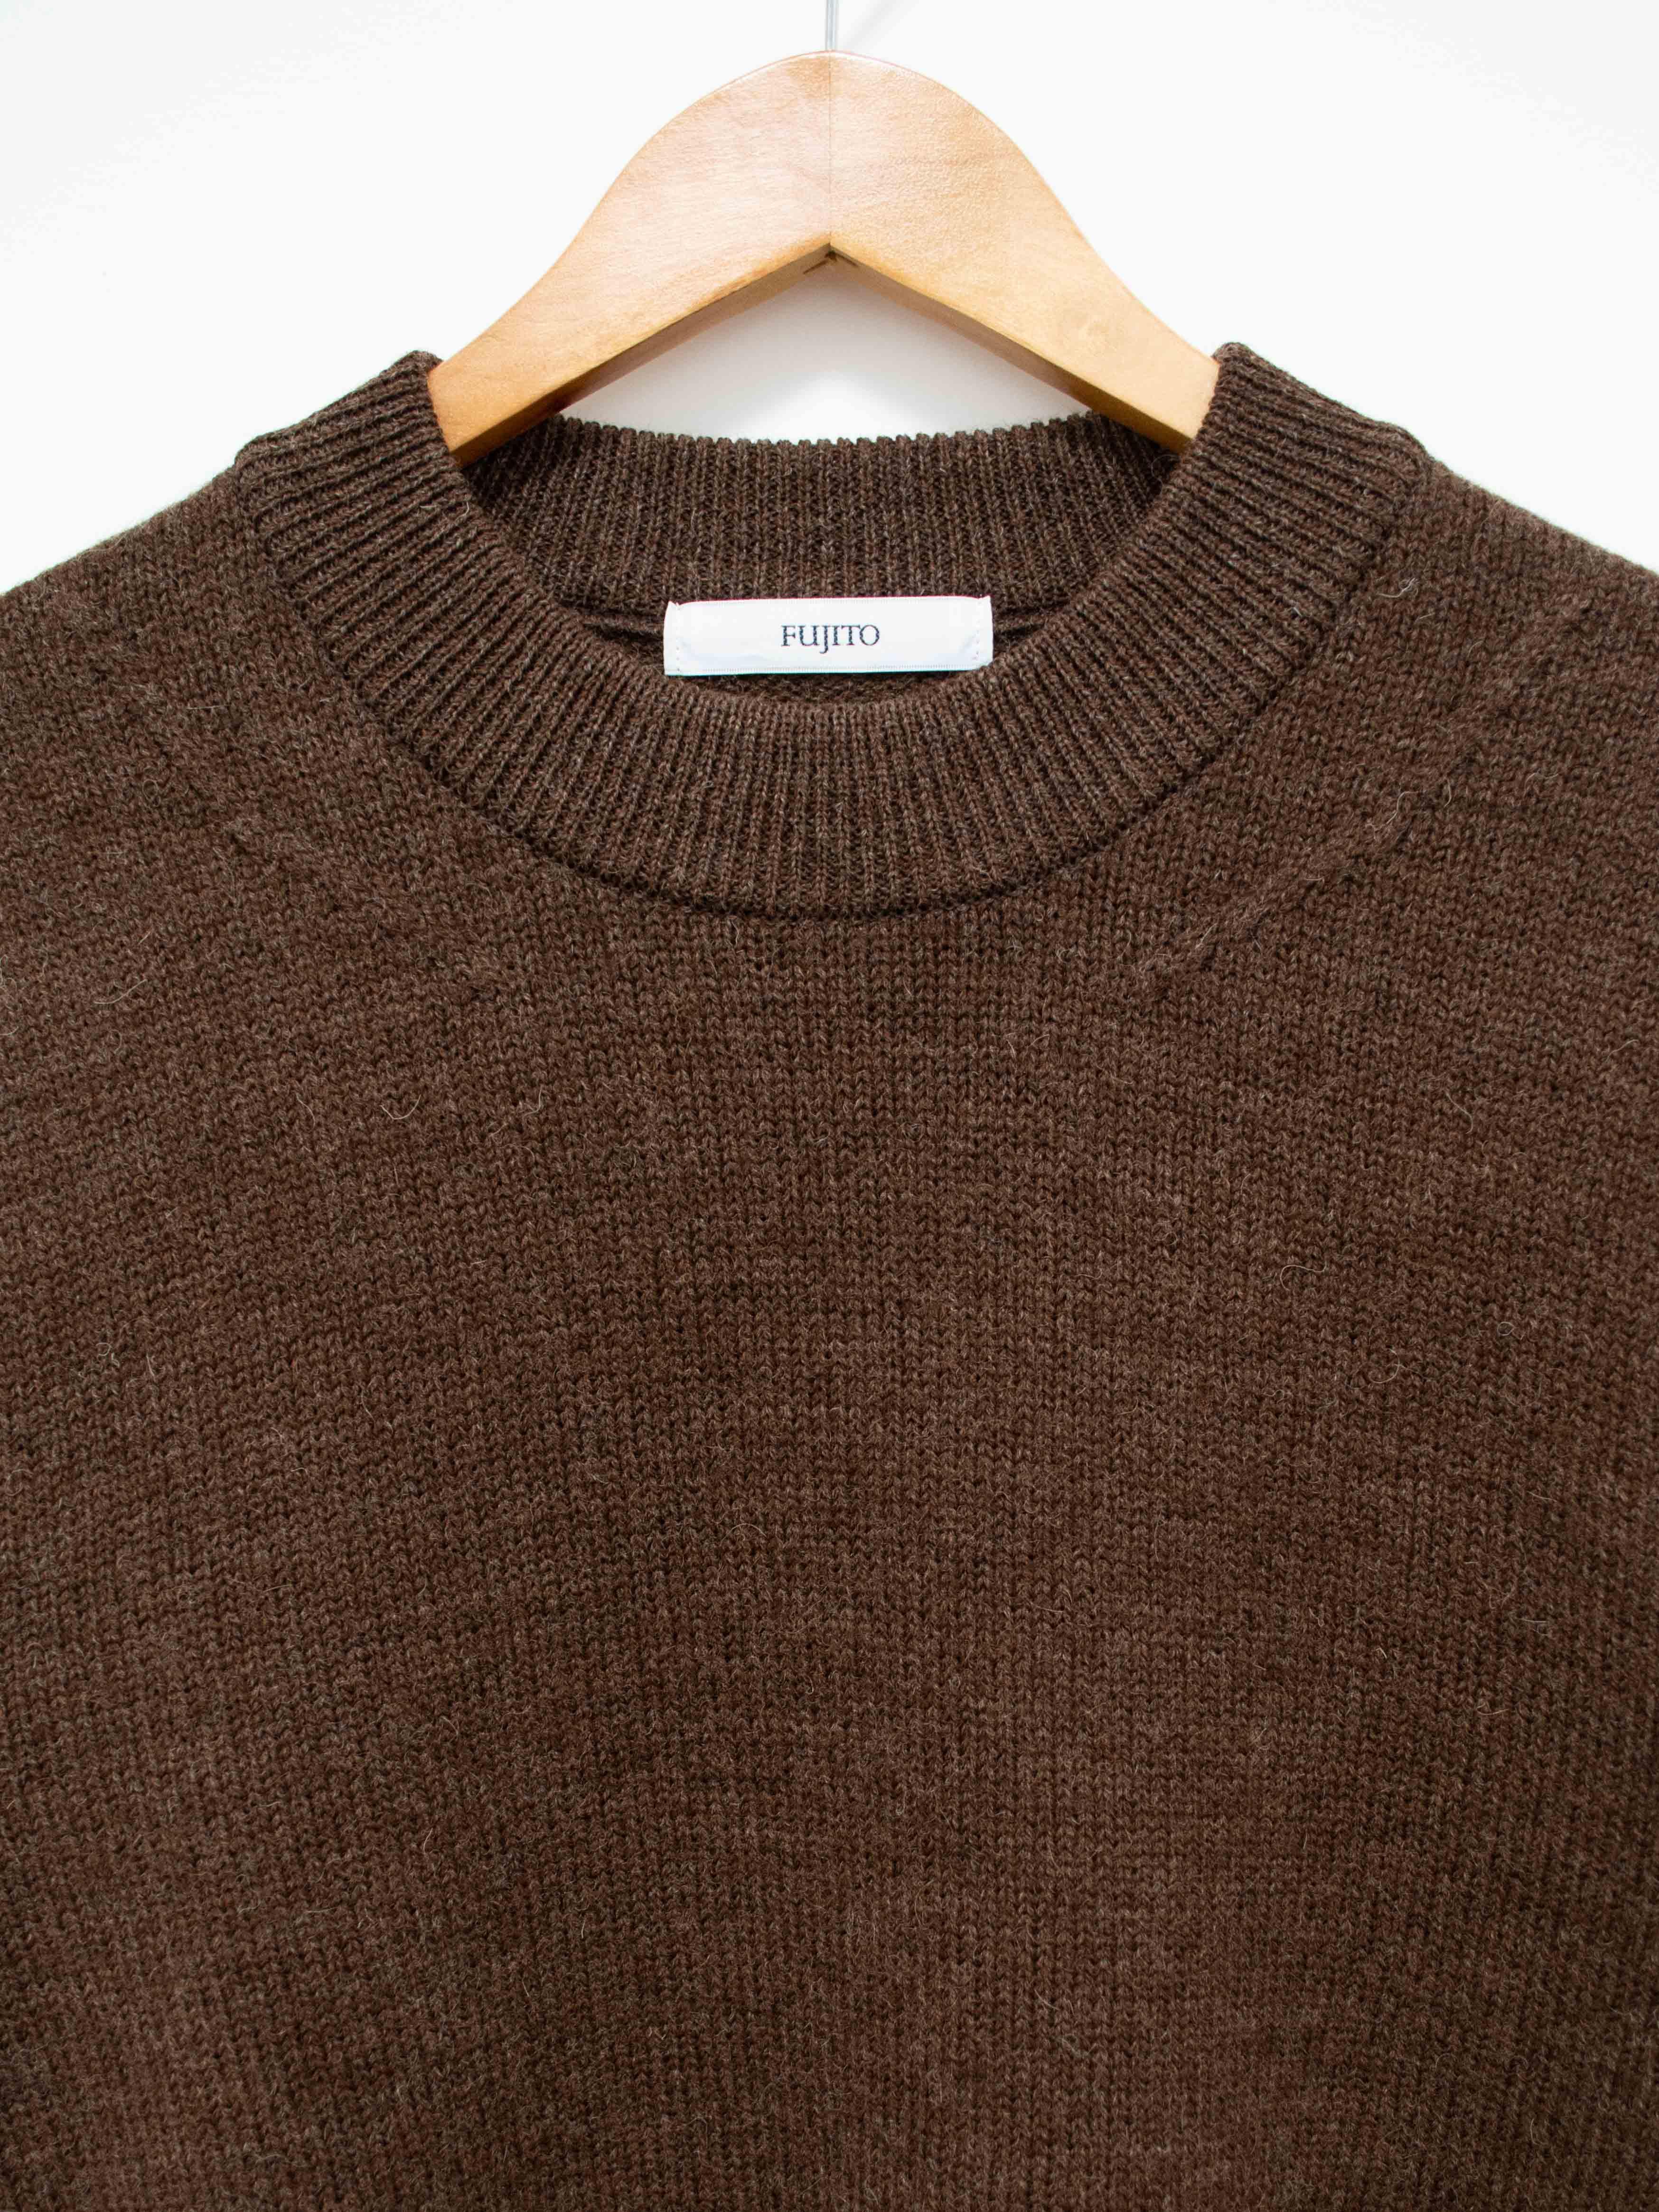 TEXT Super220’s South American Wool knit